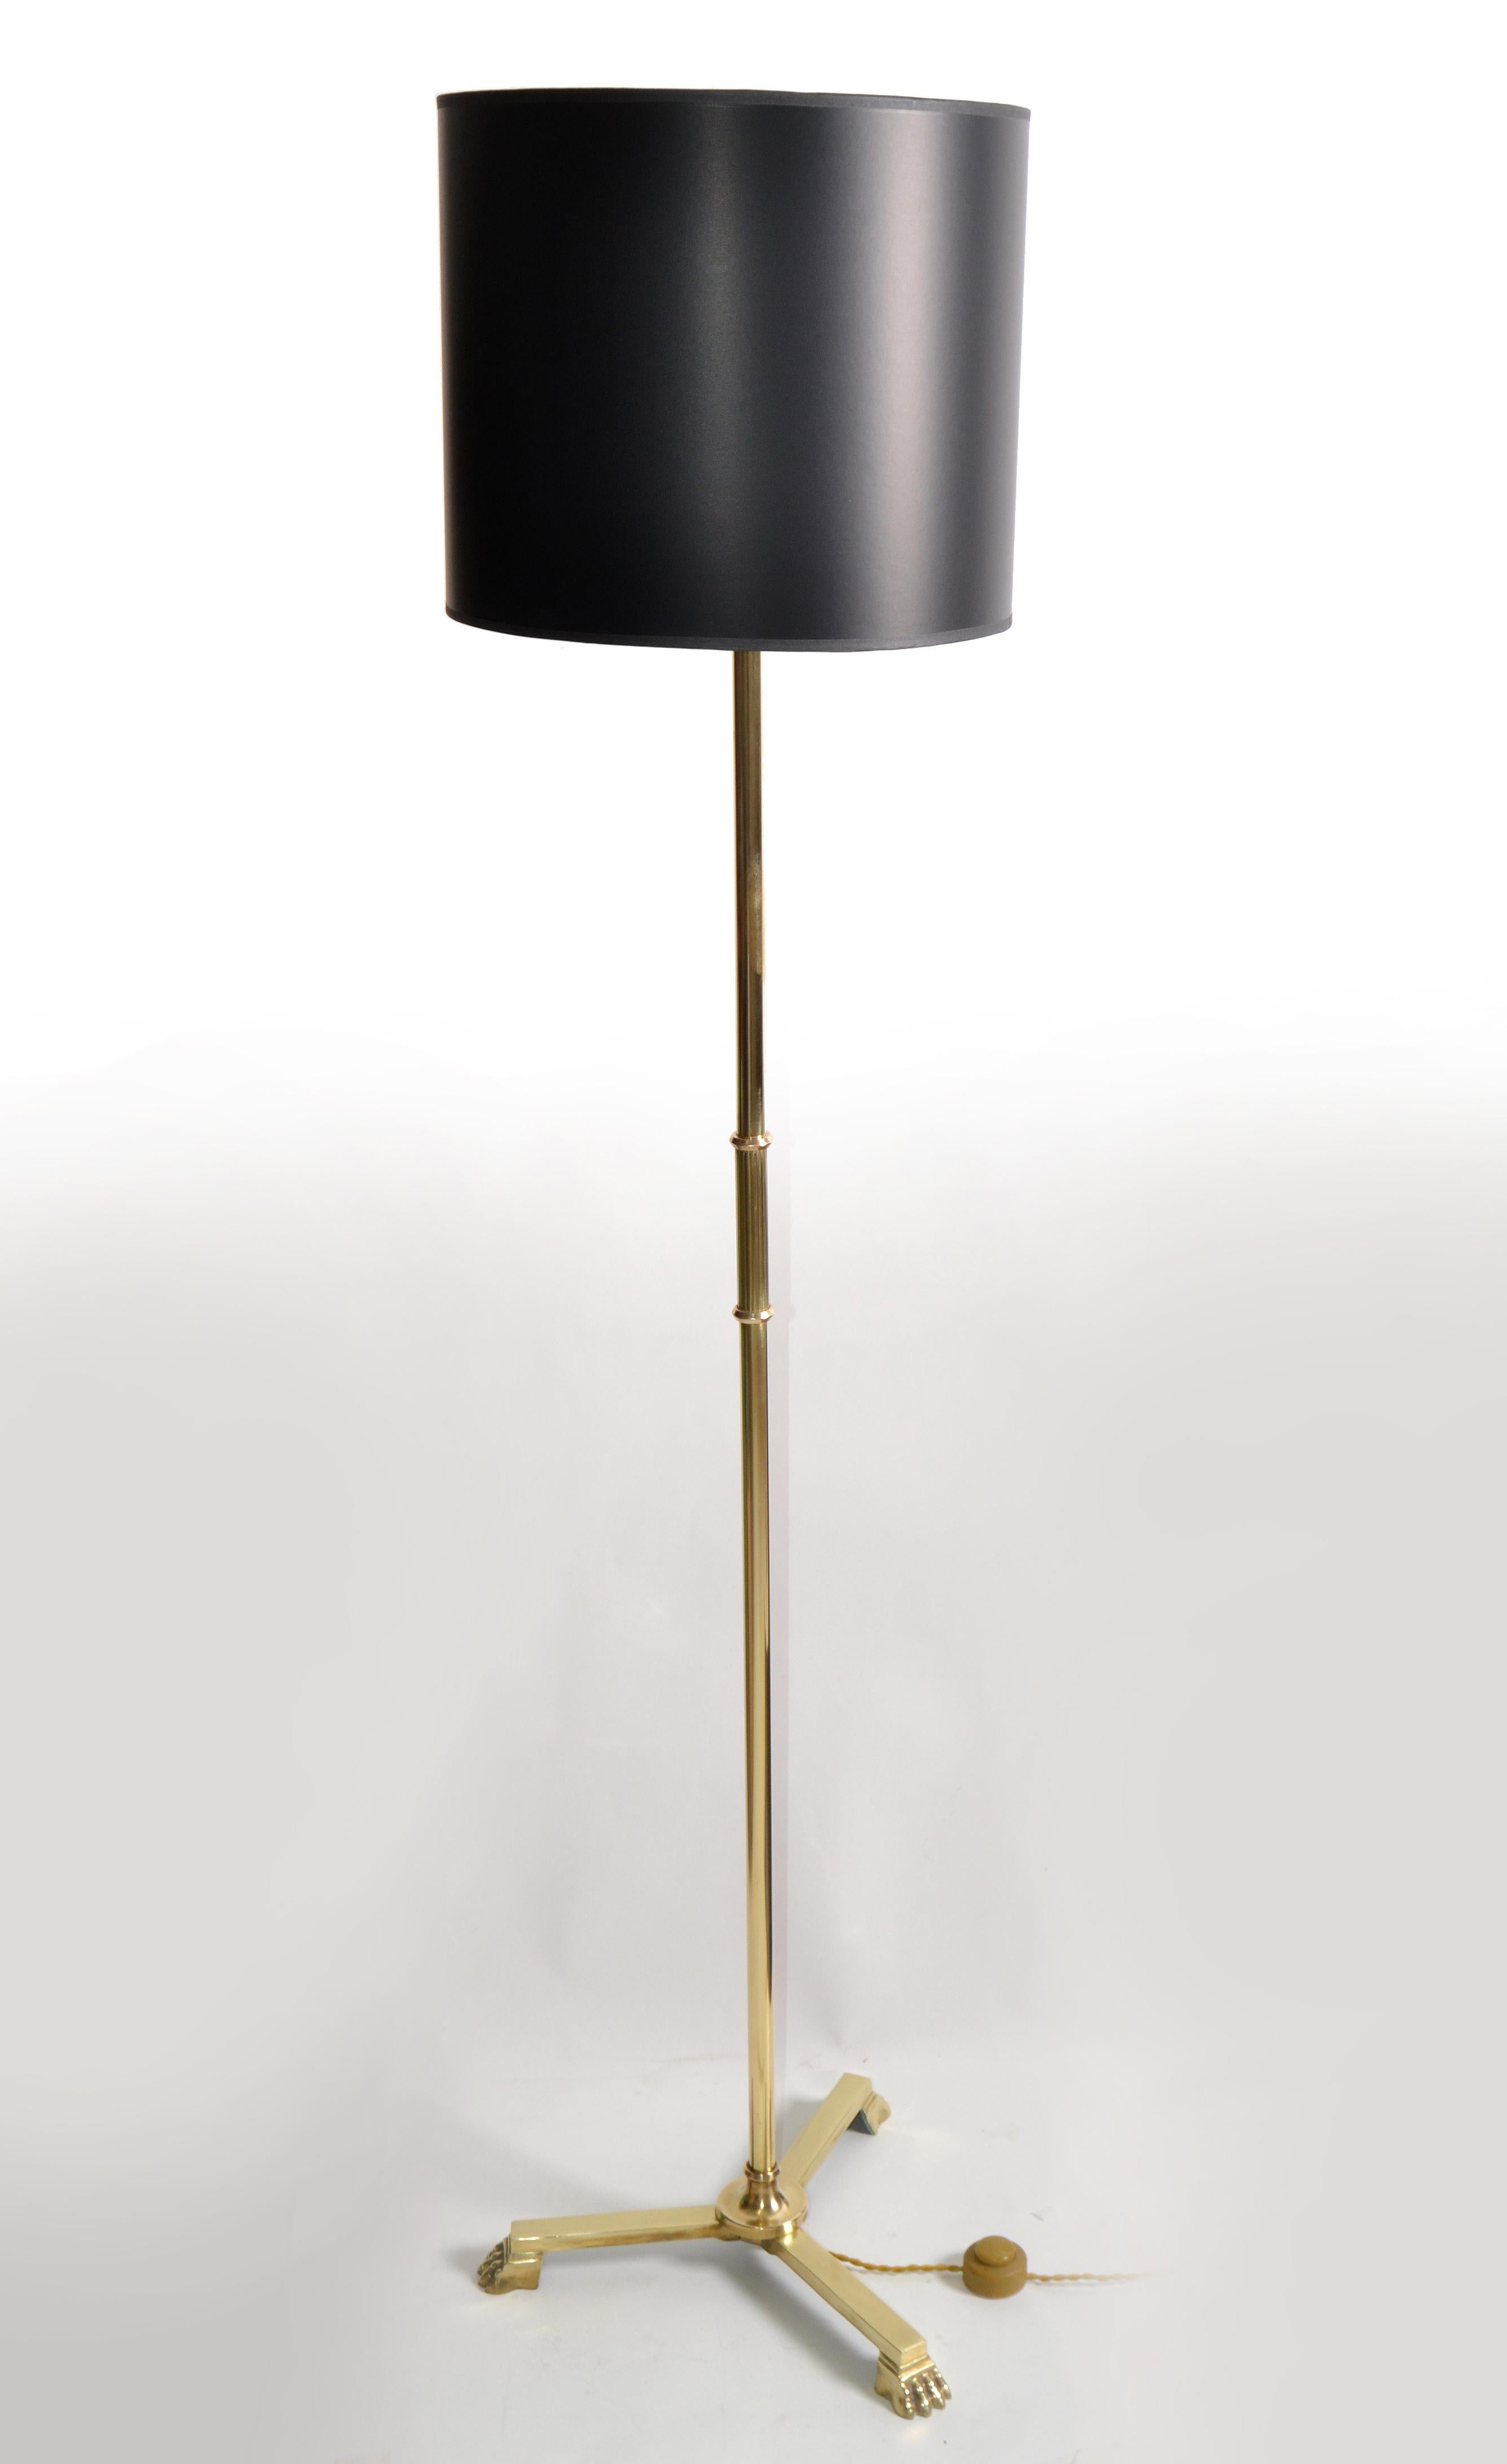 Neoclassical two patina bronze floor lamp with a tripod claw feet base, made in france in the 1950s.
Original European wired takes one regular Light bulb or LED comes with a foot switch.
Sold with clip on adapter and custom made black & gold paper